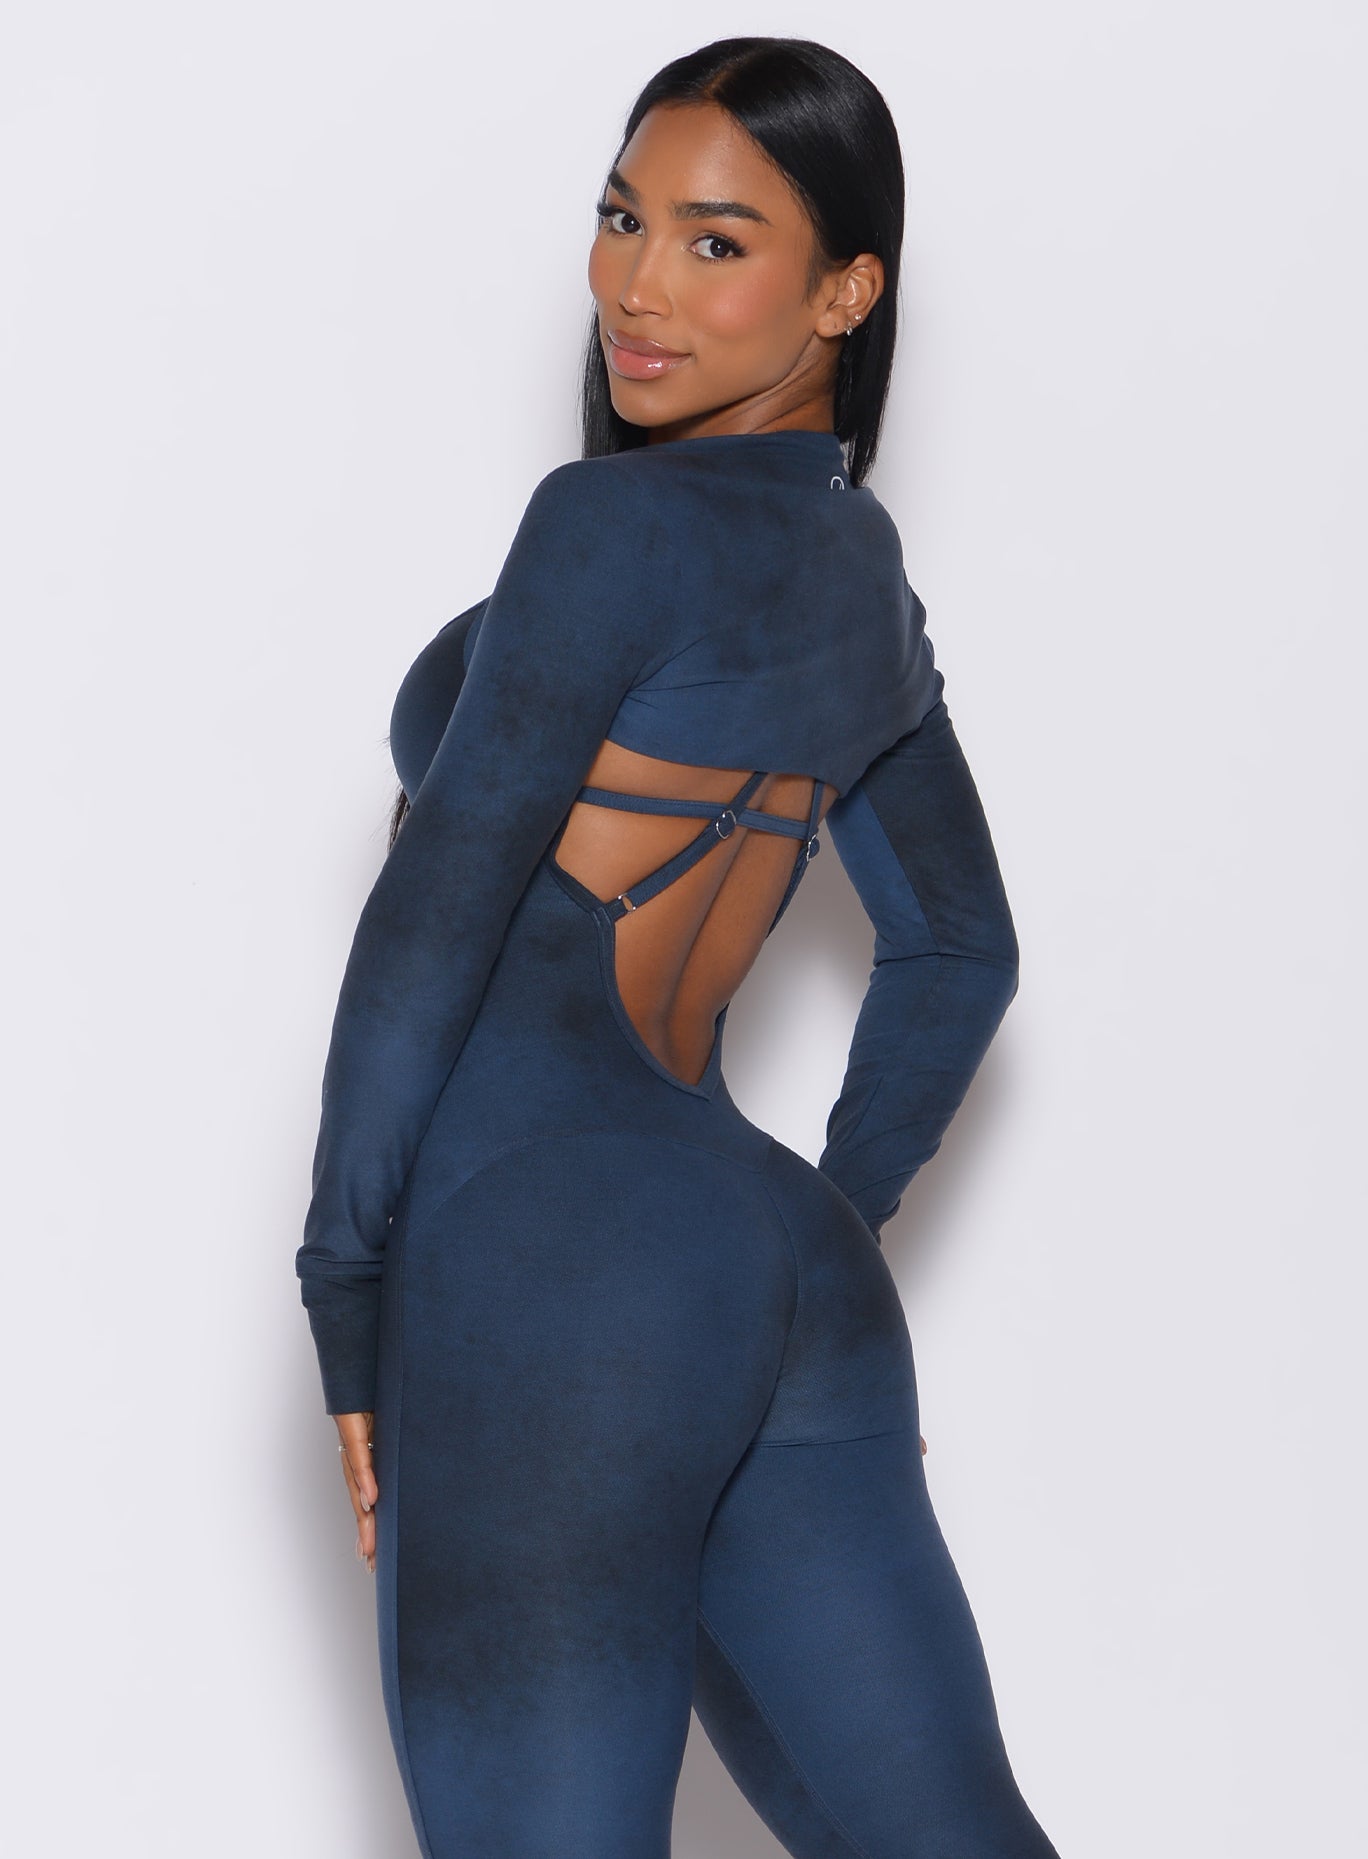 Left side profile view of a model wearing our shape shrug in vintage blue color along with the matching full length bodysuit